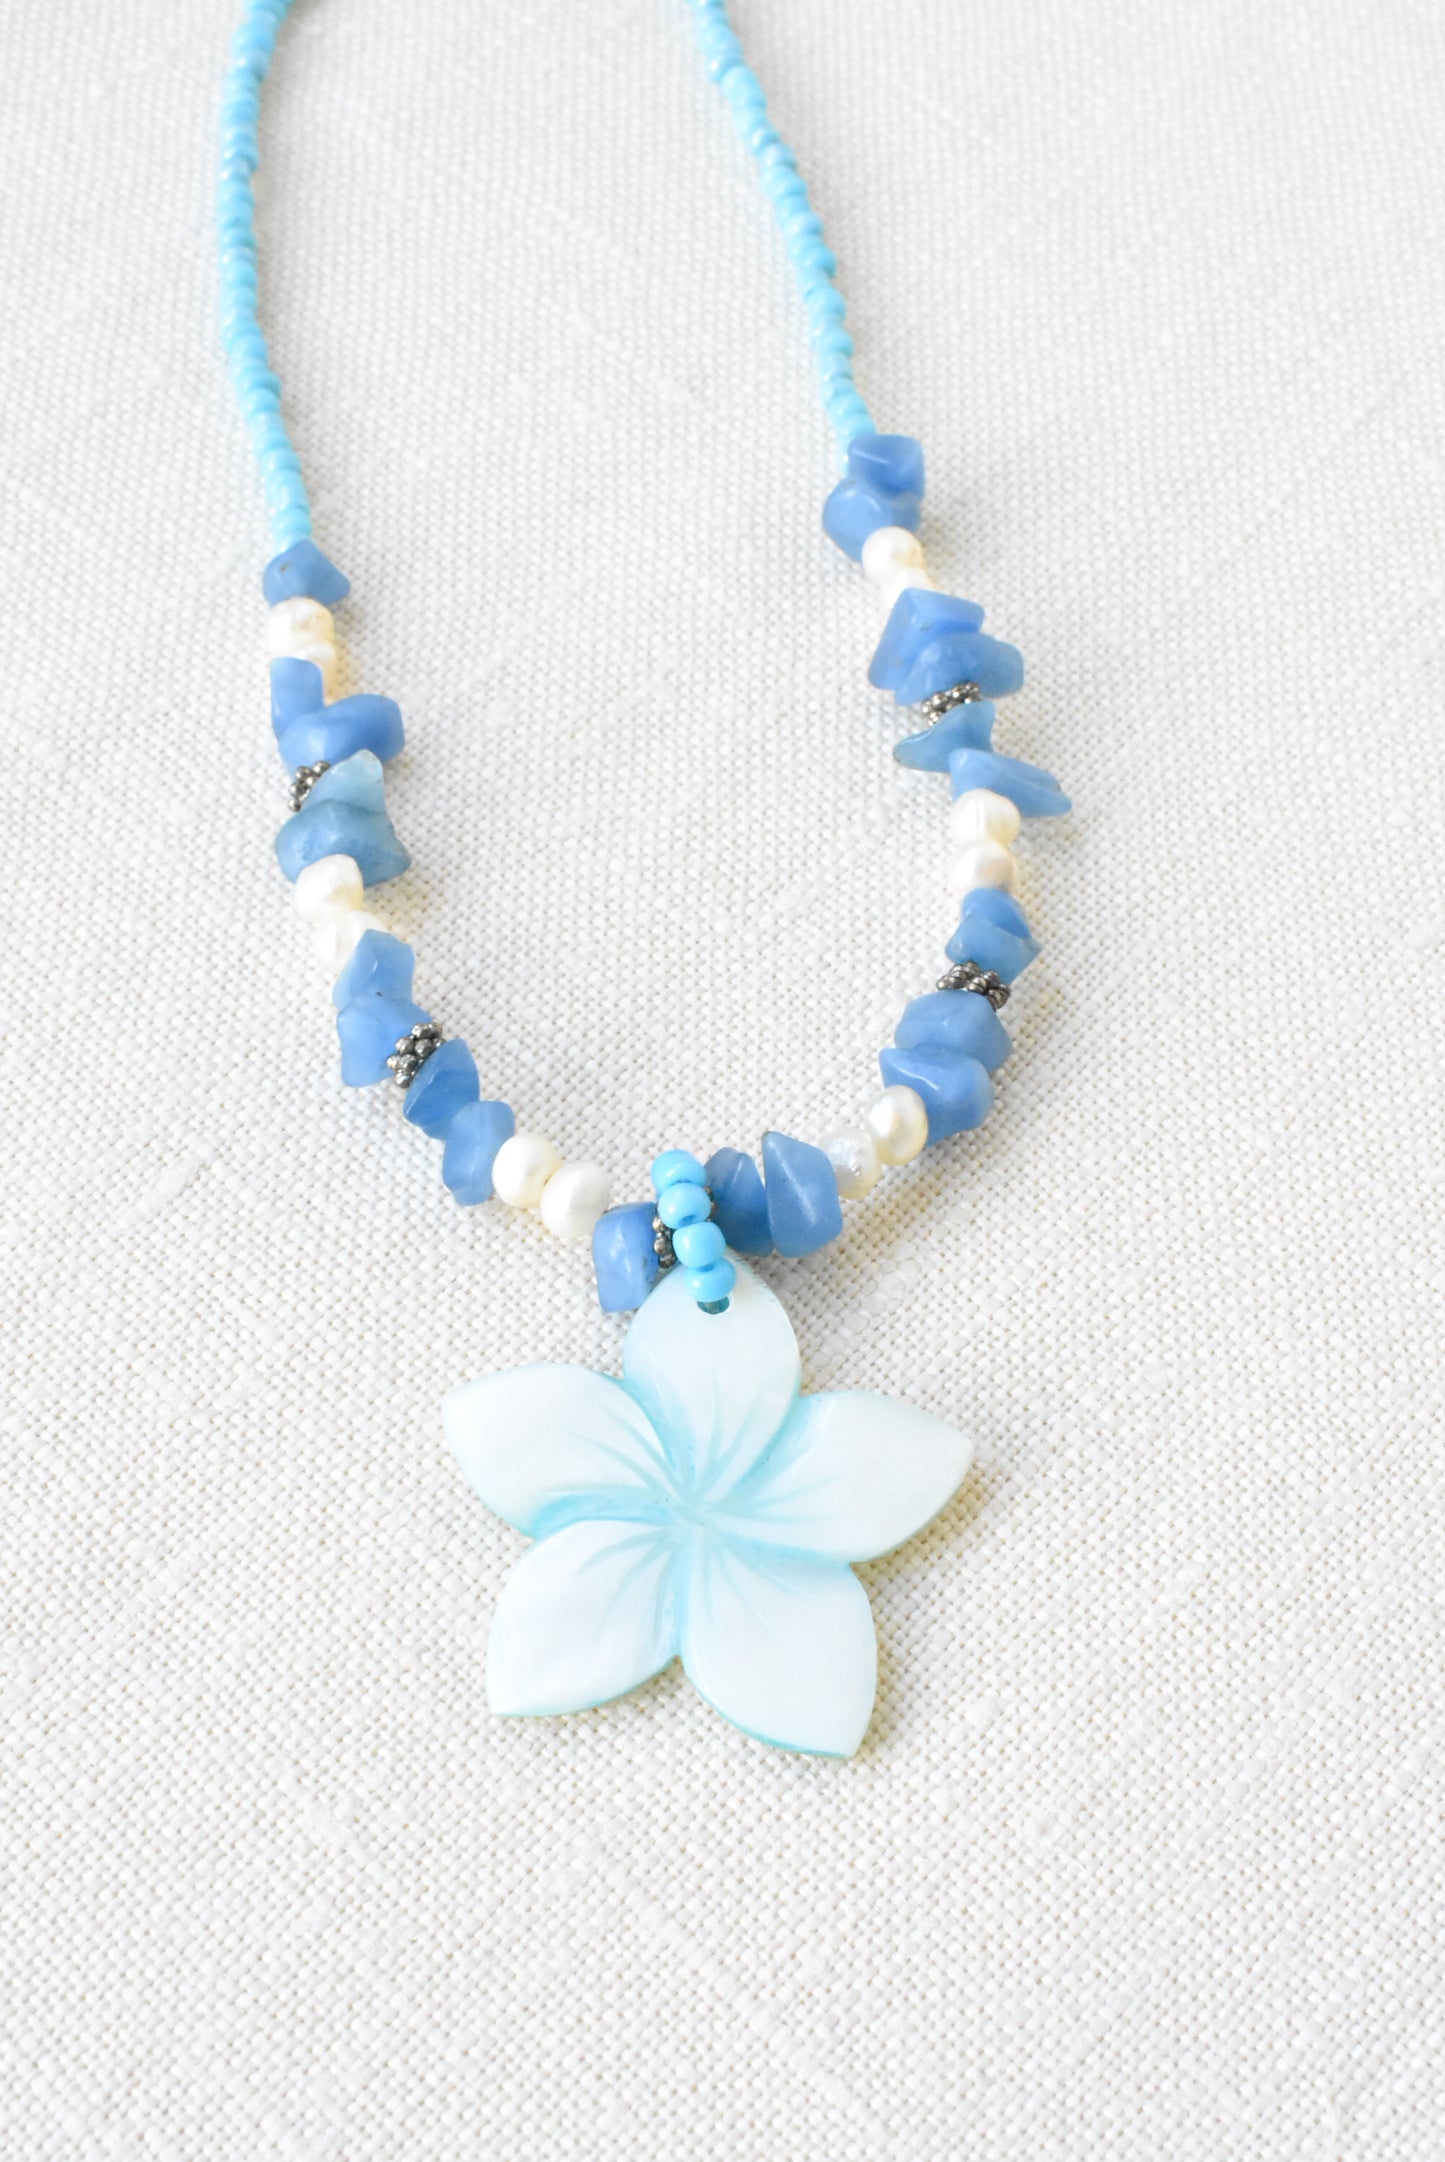 Flower pendant necklace with pearls, shell and blue gemstones